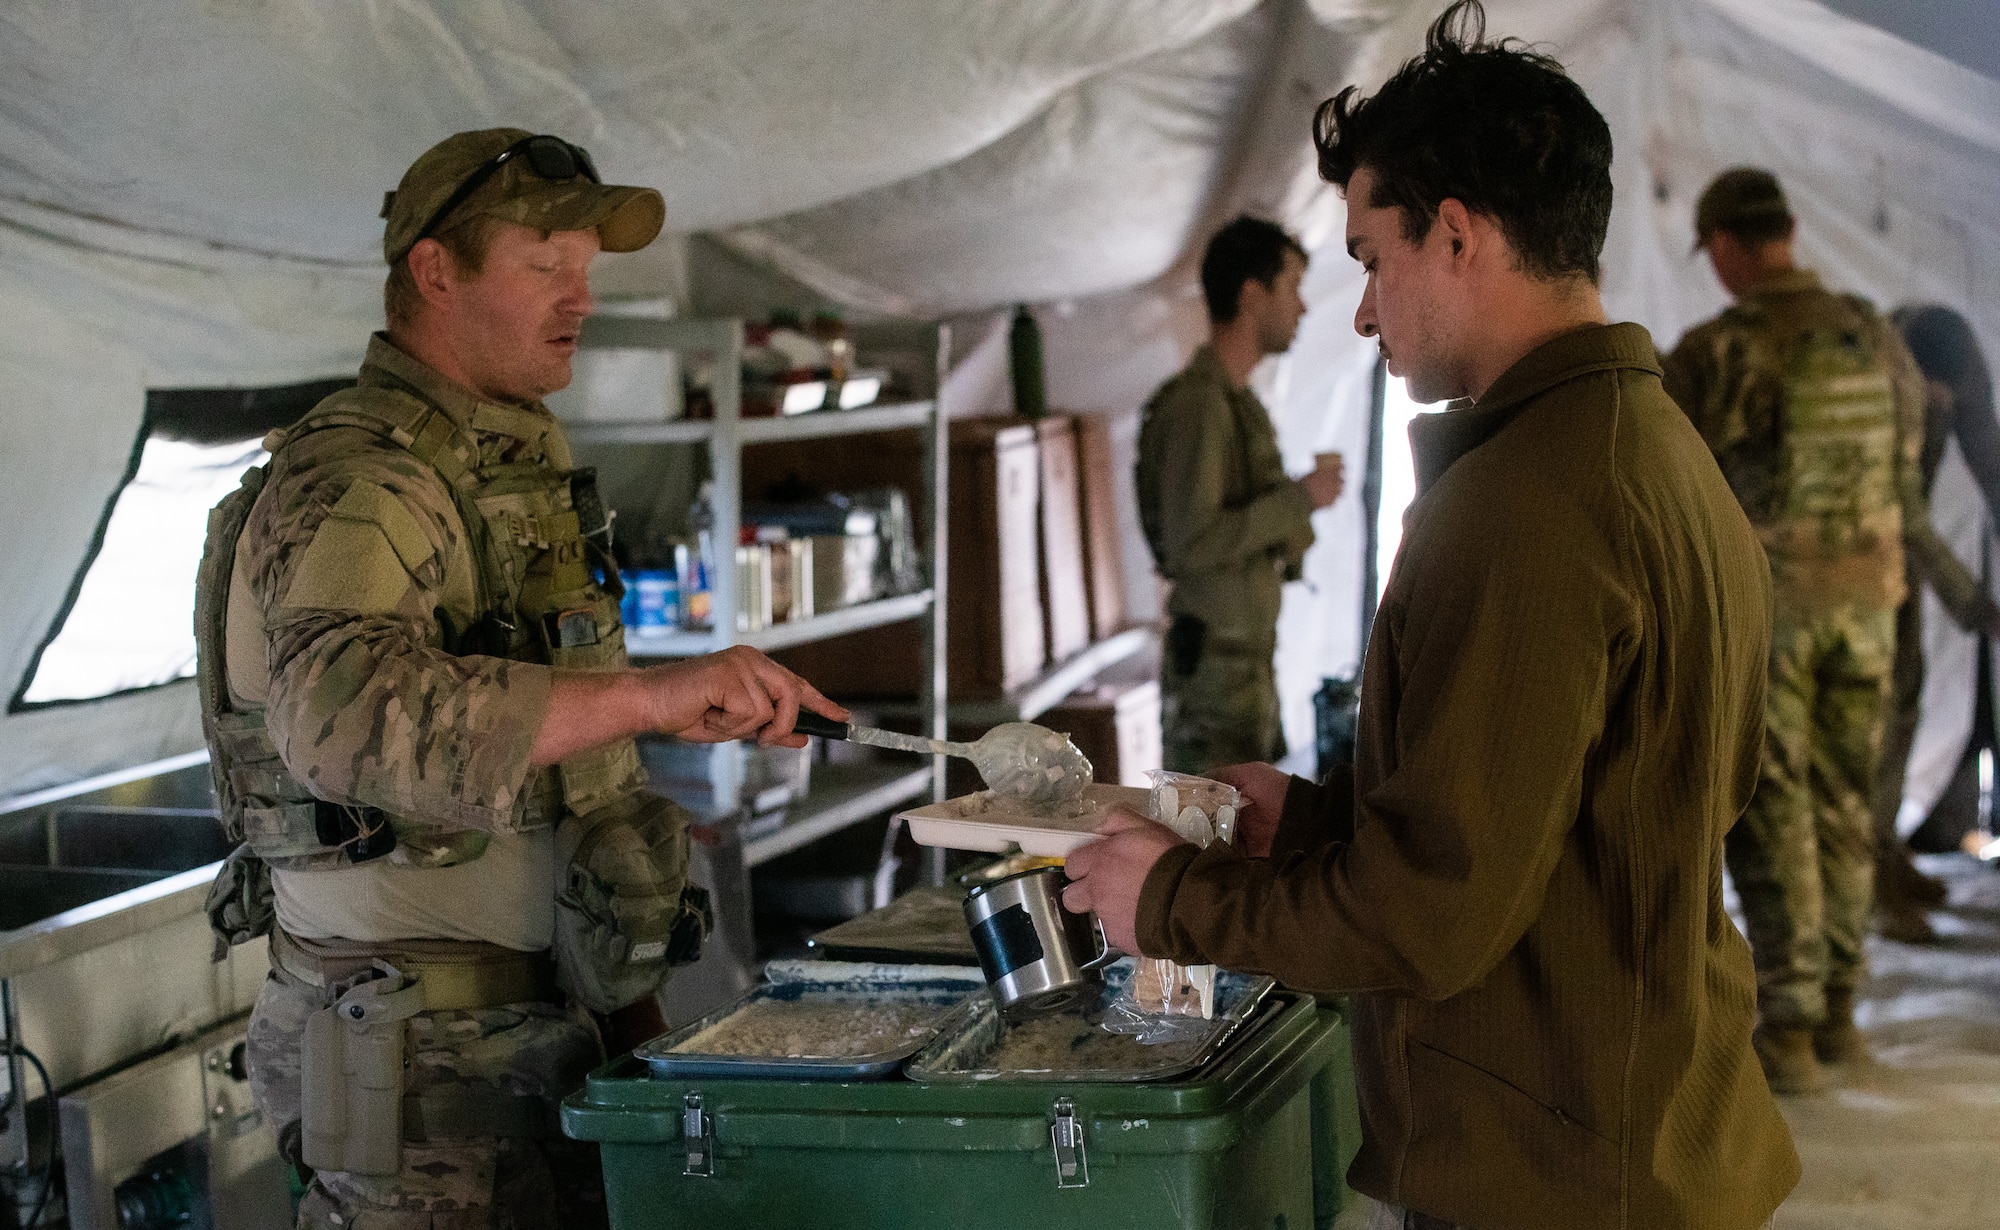 U.S. Air Force Staff Sgt. Tyler Kochlany, 27th Special Operations Civil Engineer Squadron explosive ordnance disposal technician, serves breakfast to Senior Airman Mark Anderson, 27th Special Operations Communications Squadron communications technician, during the Full Mission Profile 22-3 exercise at Sierra Blanca Regional Airport, New Mexico. (U.S. Air Force photo by Senior Airman Christopher Storer)